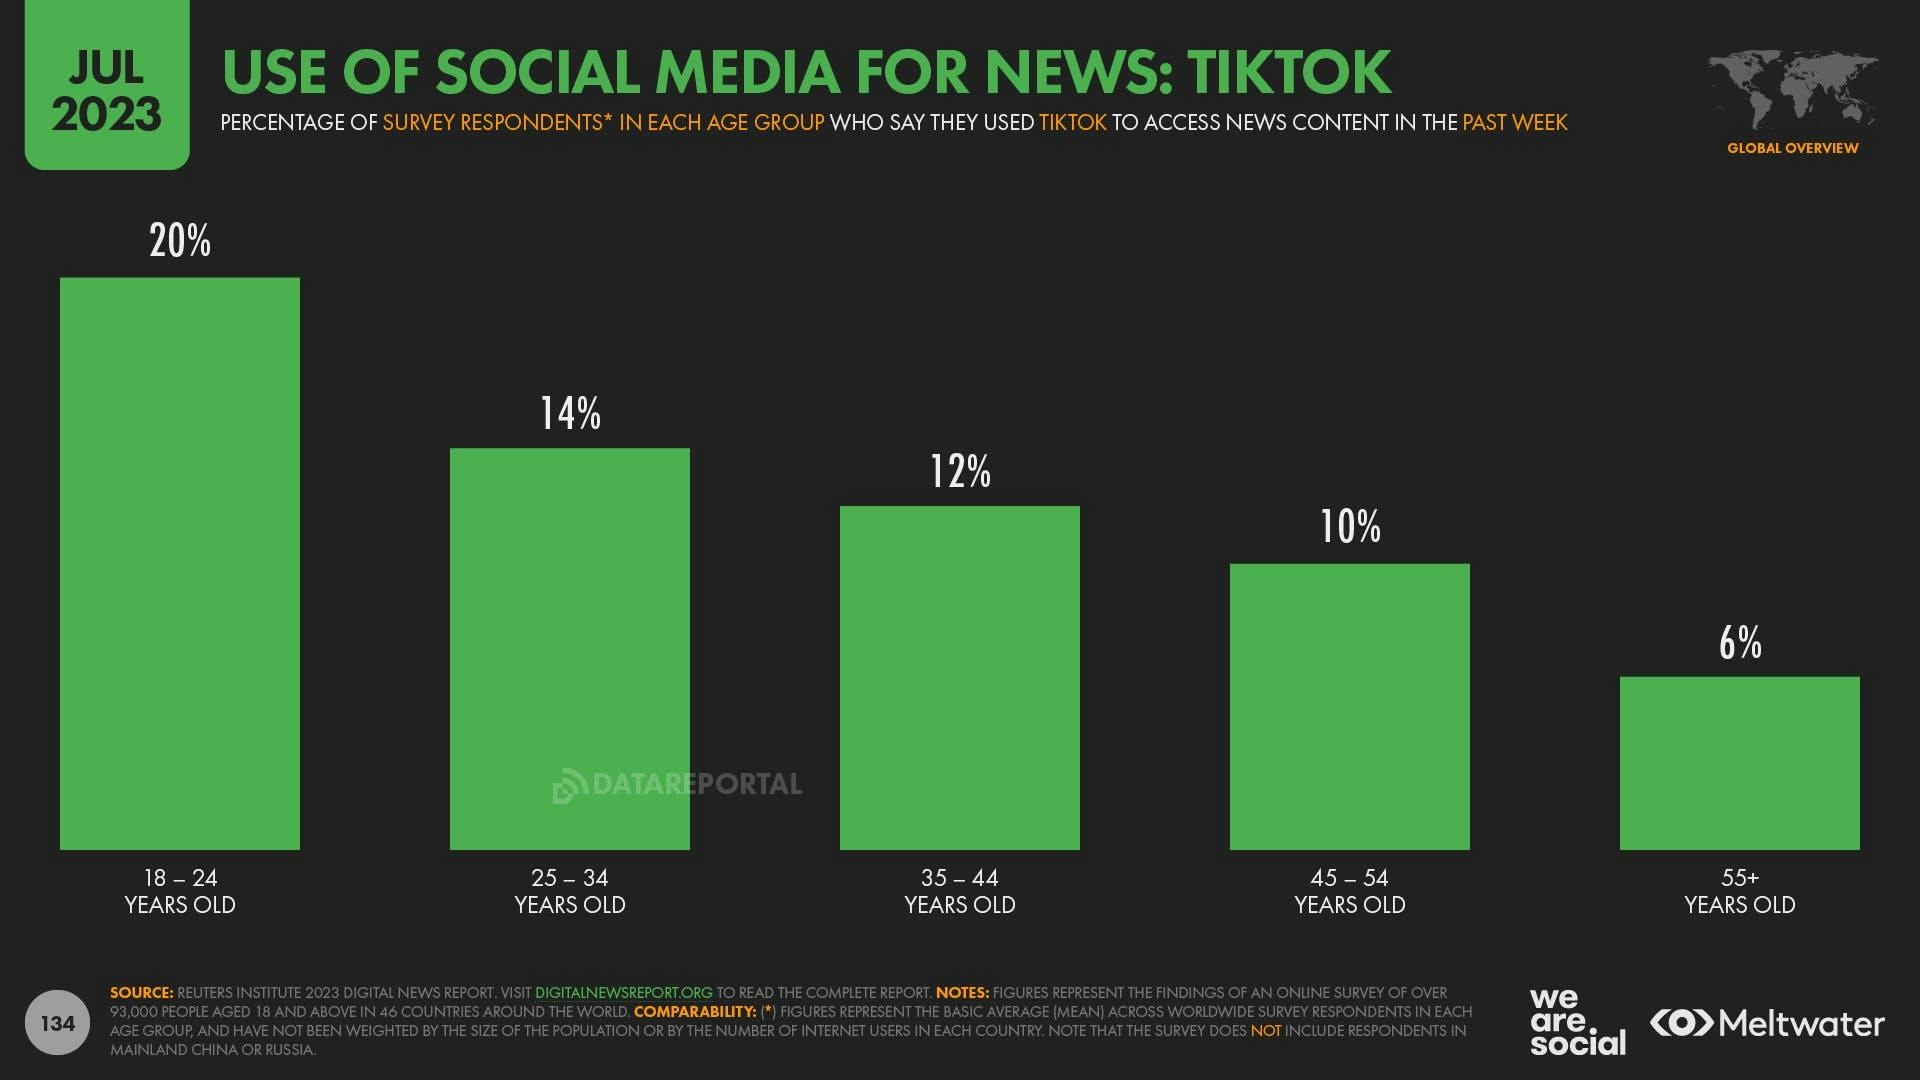 A bar chart showing the use of TikTok for news across age groups.